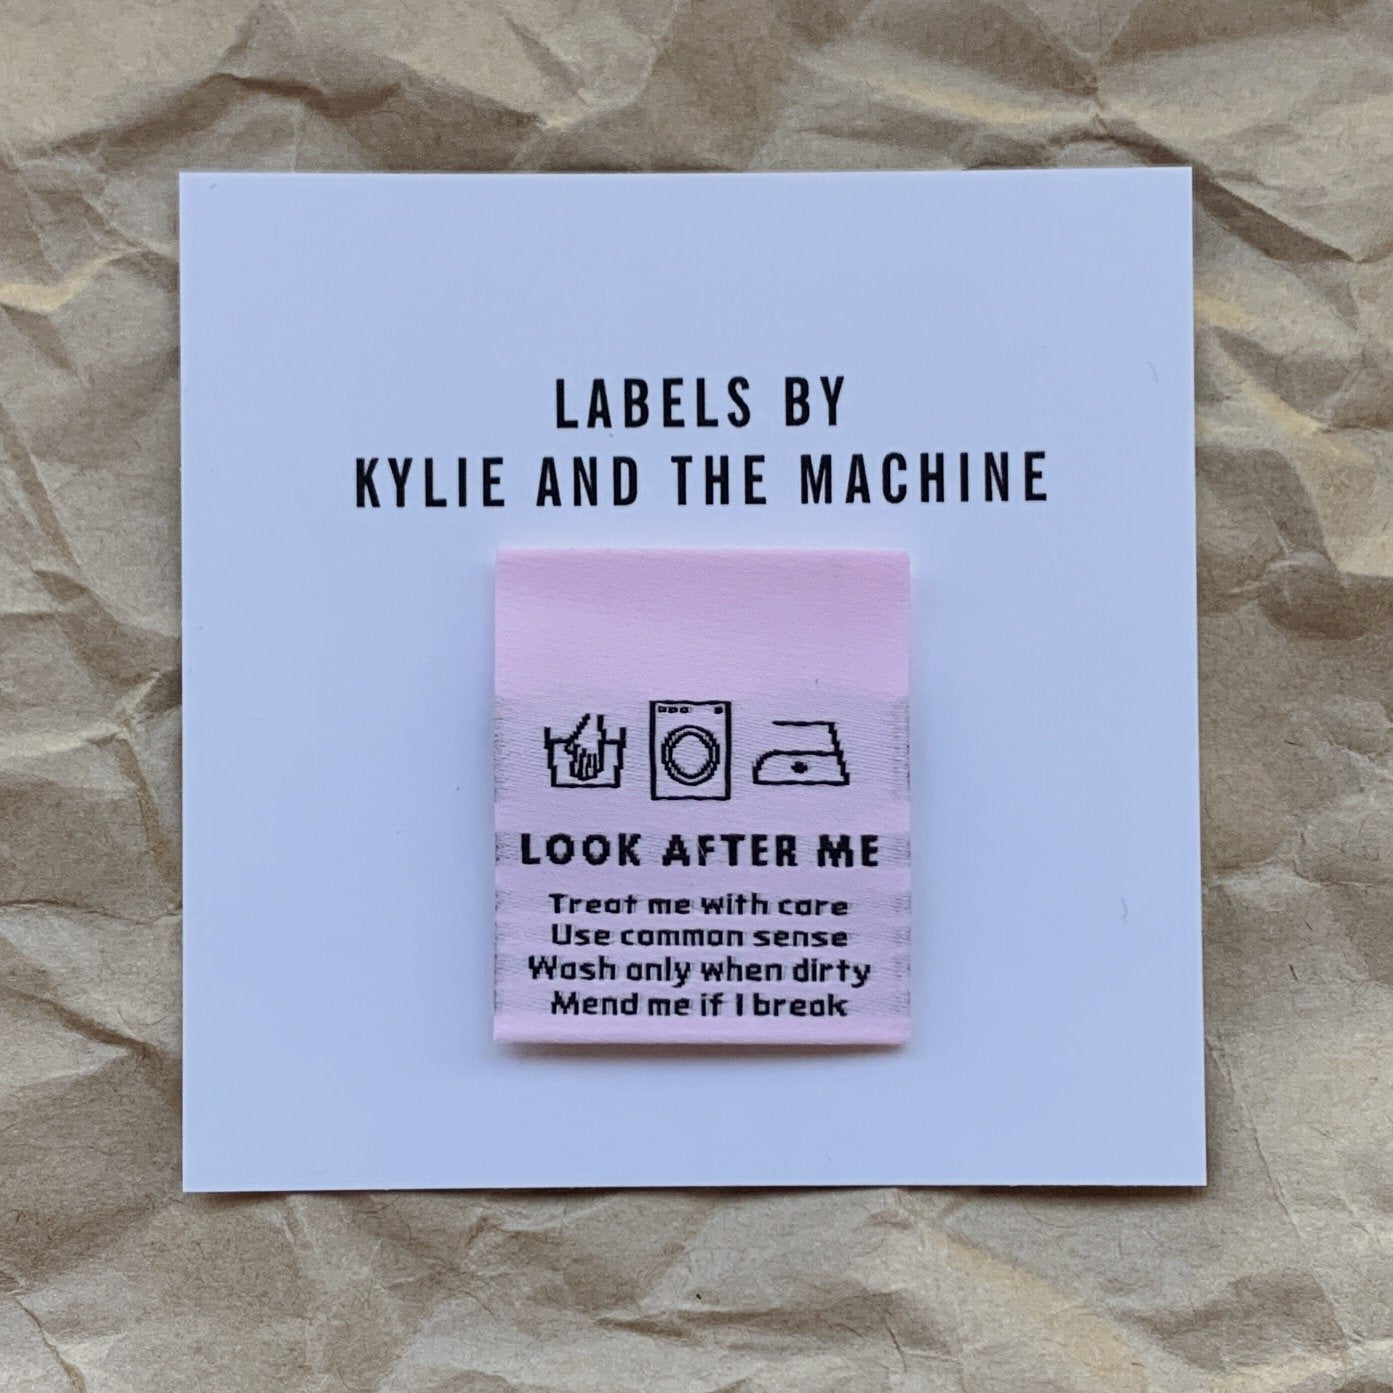 "Look After Me" Woven Labels 8 pack